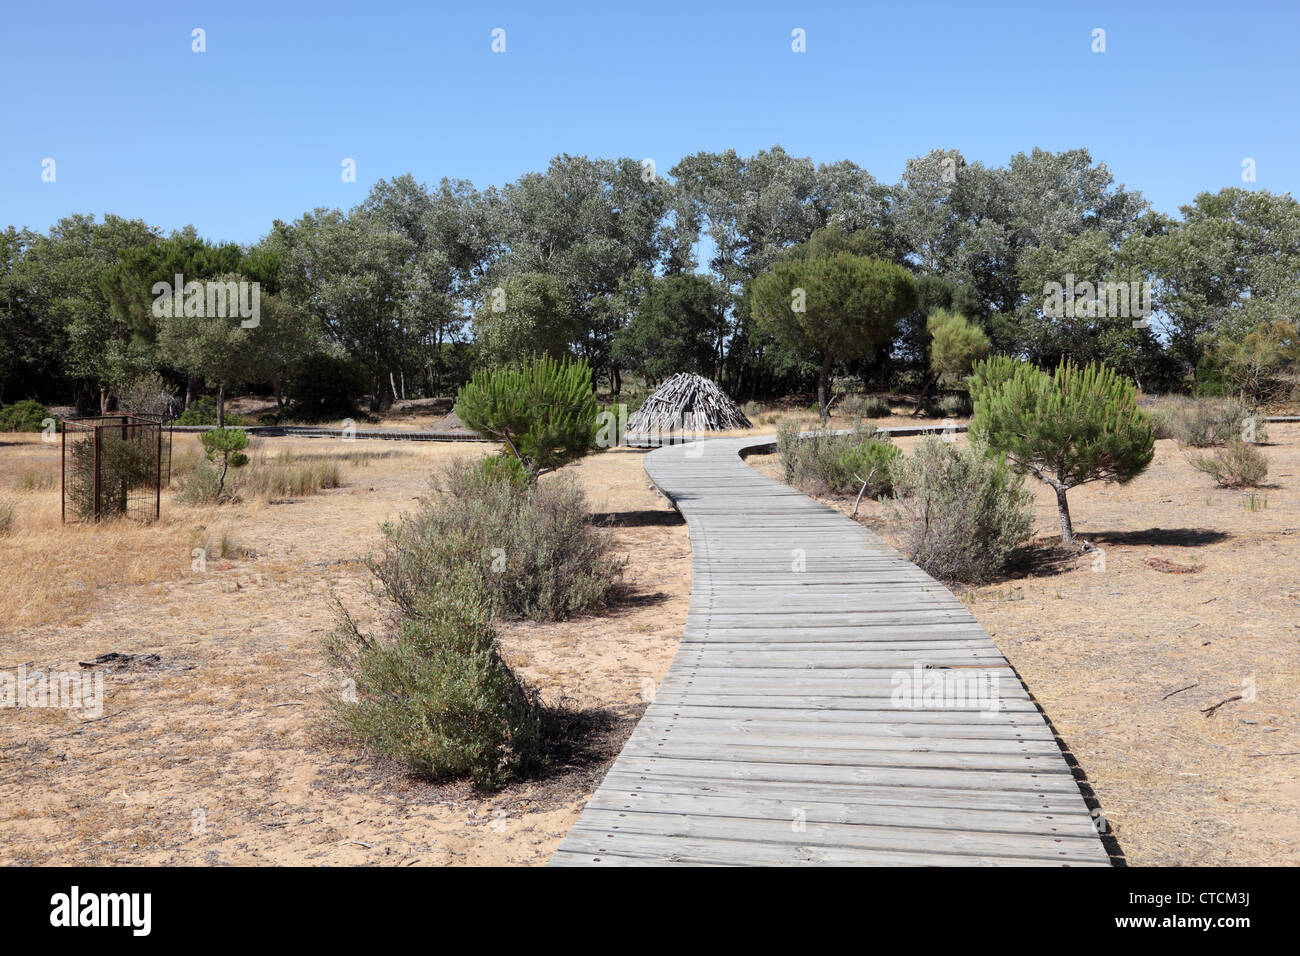 Wooden walkway in the Doñana National Park, Andalusia Spain Stock Photo